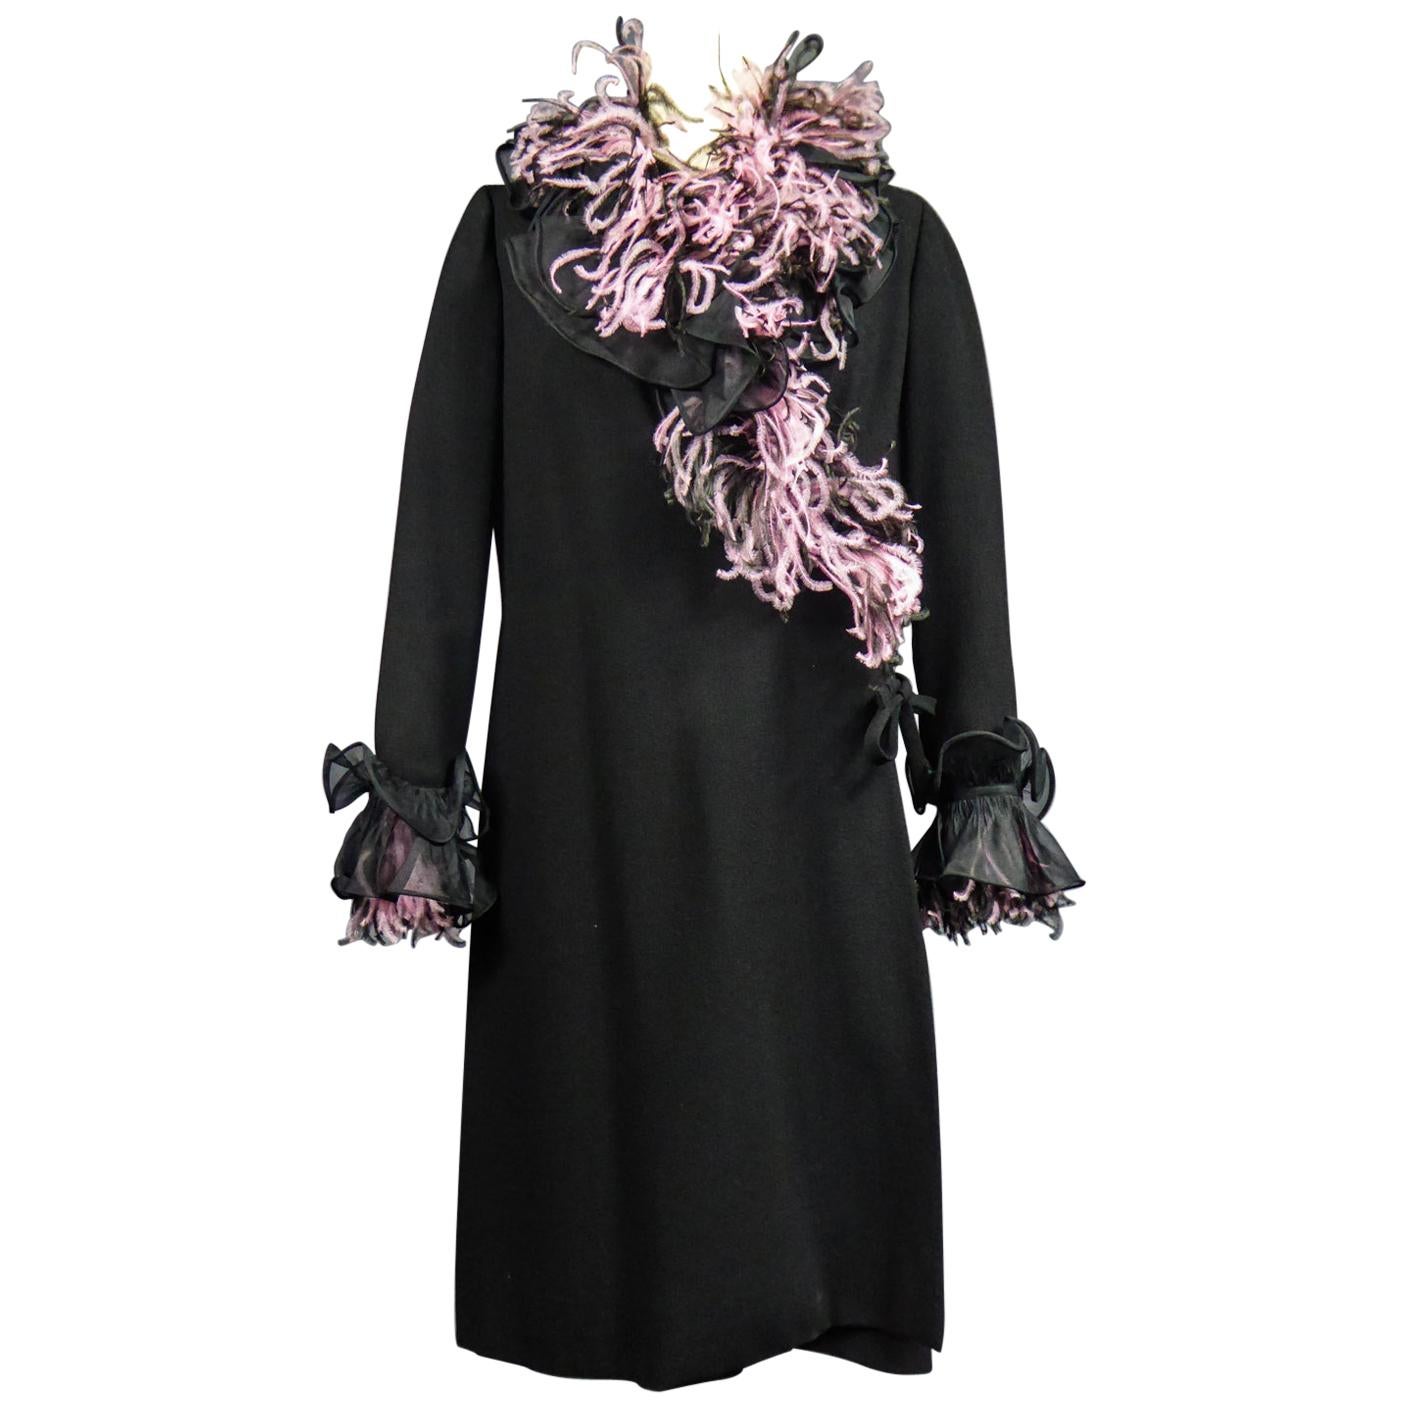 An Yves Saint Laurent Haute Couture Coat Dress Numbered 29390 Circa 1970/1980